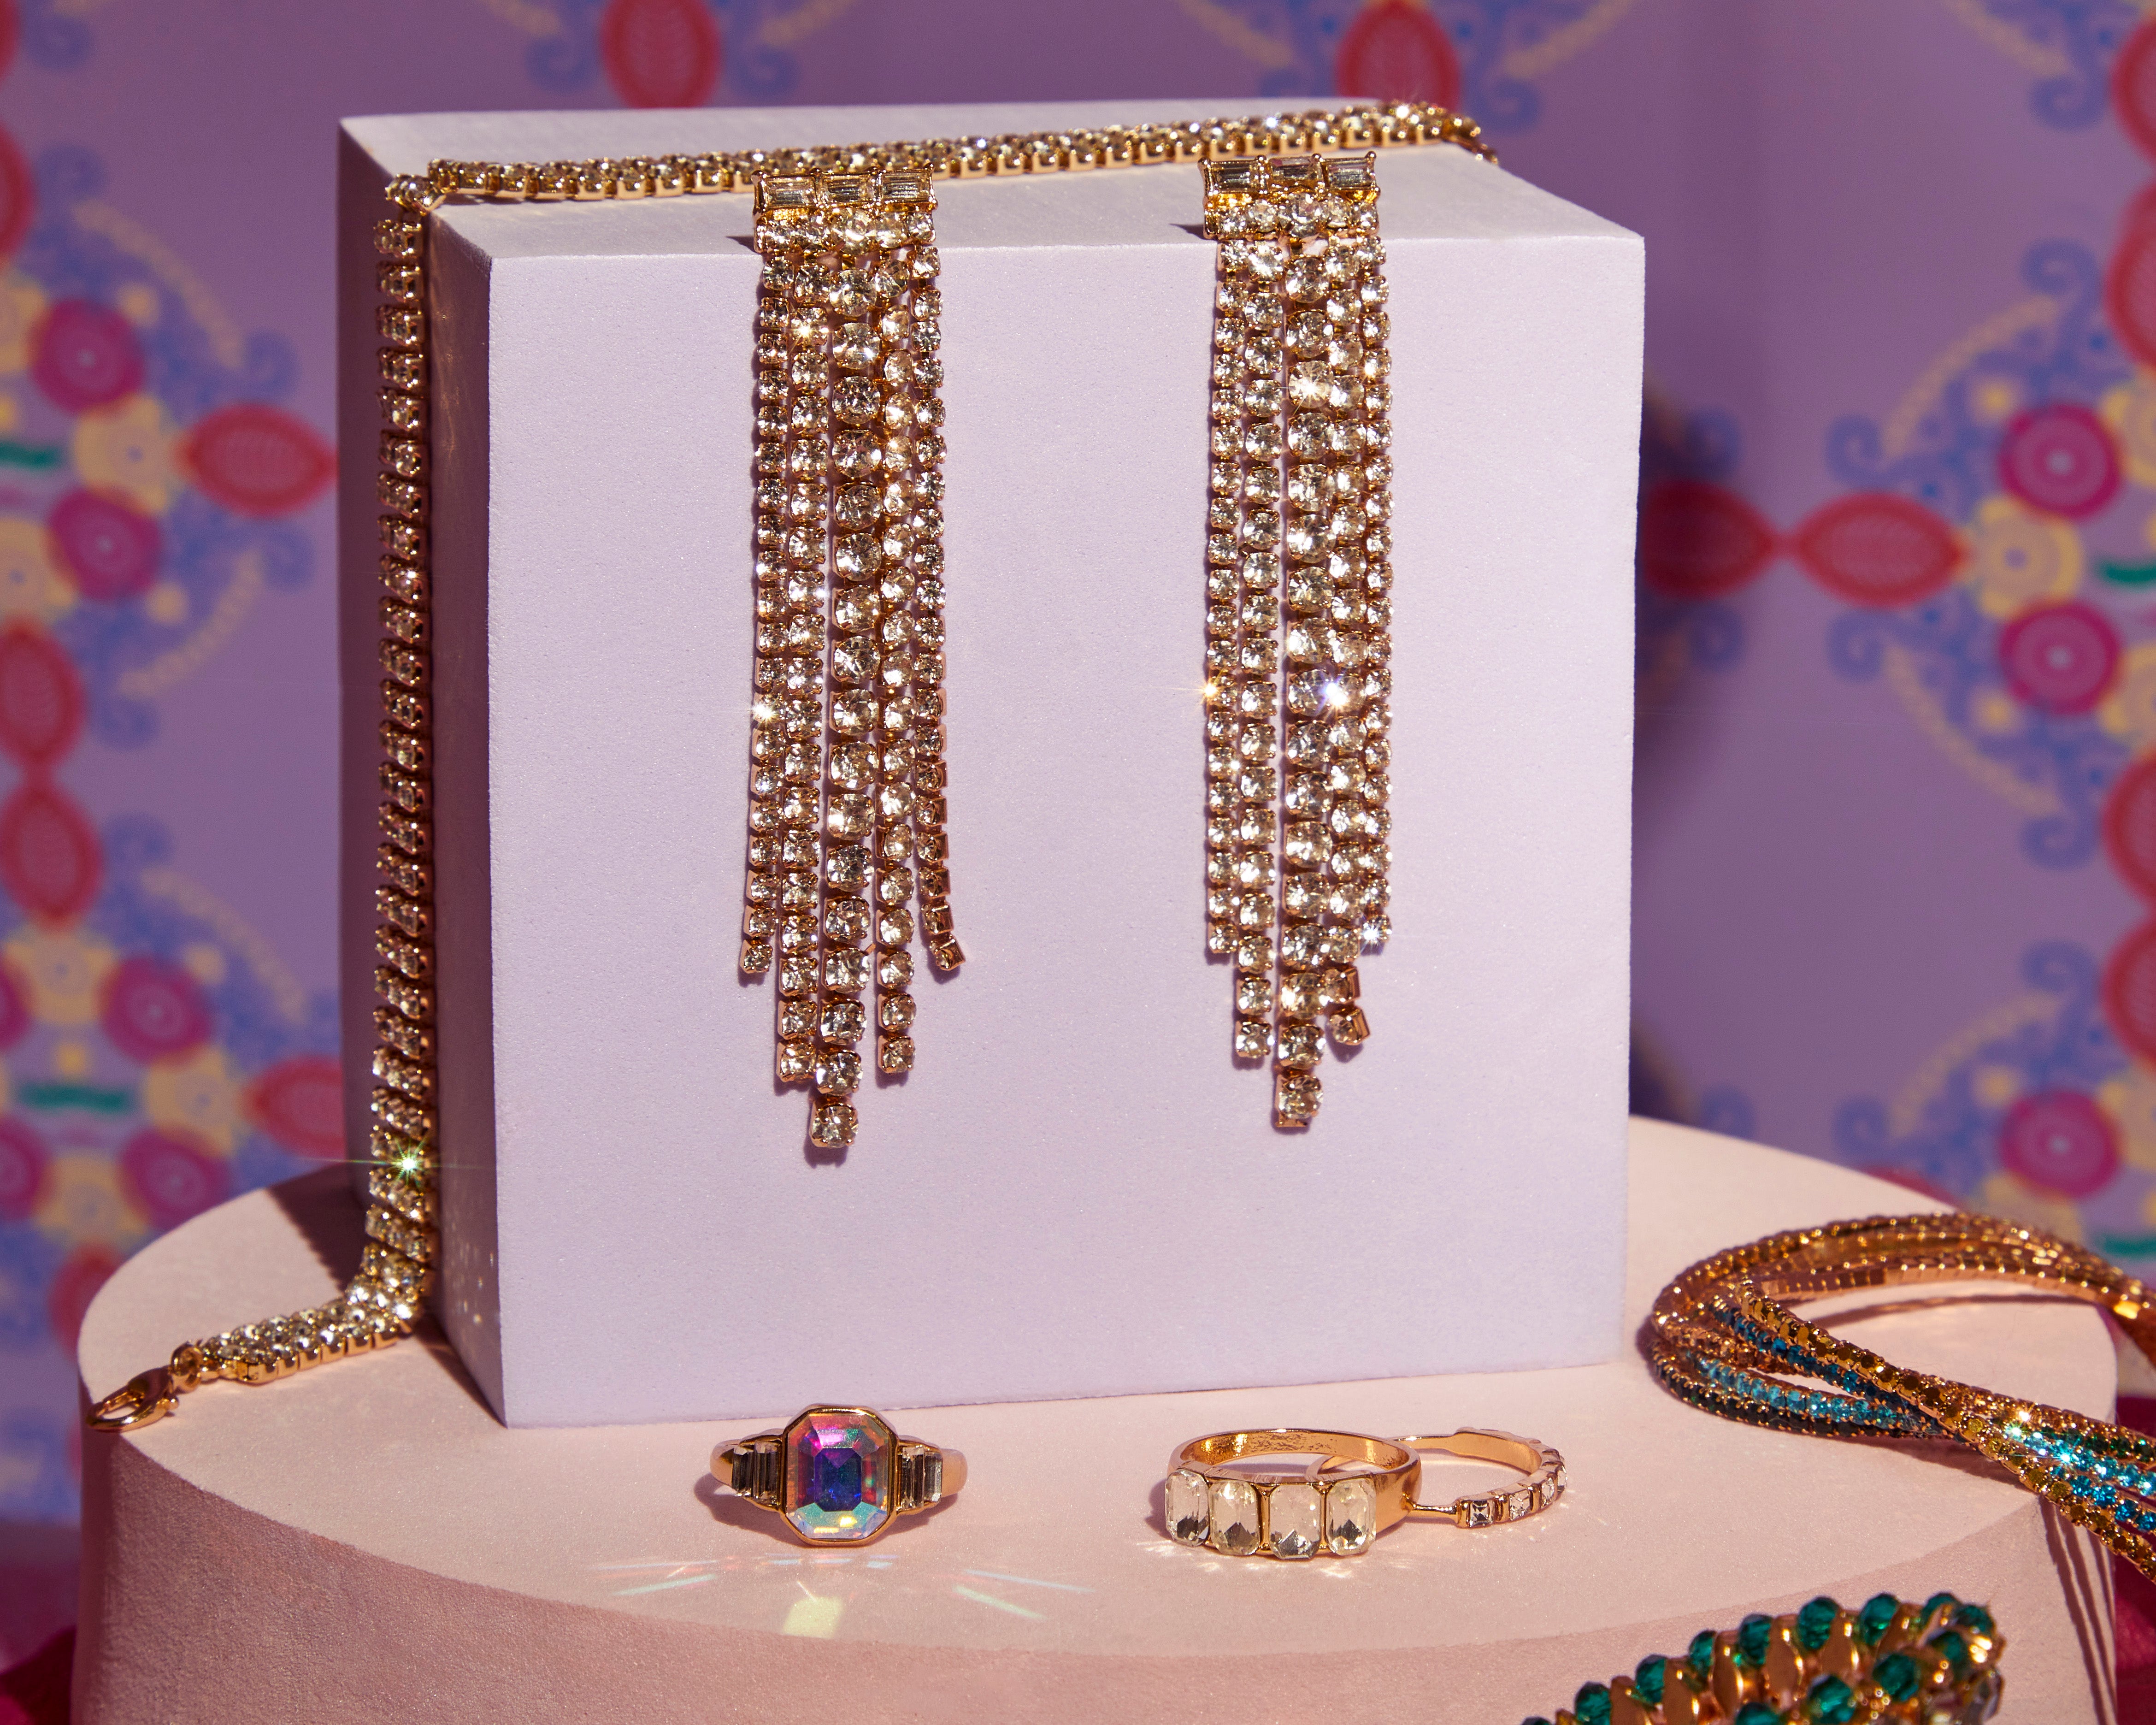 ELEVATE YOUR STYLE: A GUIDE TO MATCHING JEWELLERY WITH YOUR WARDROBE